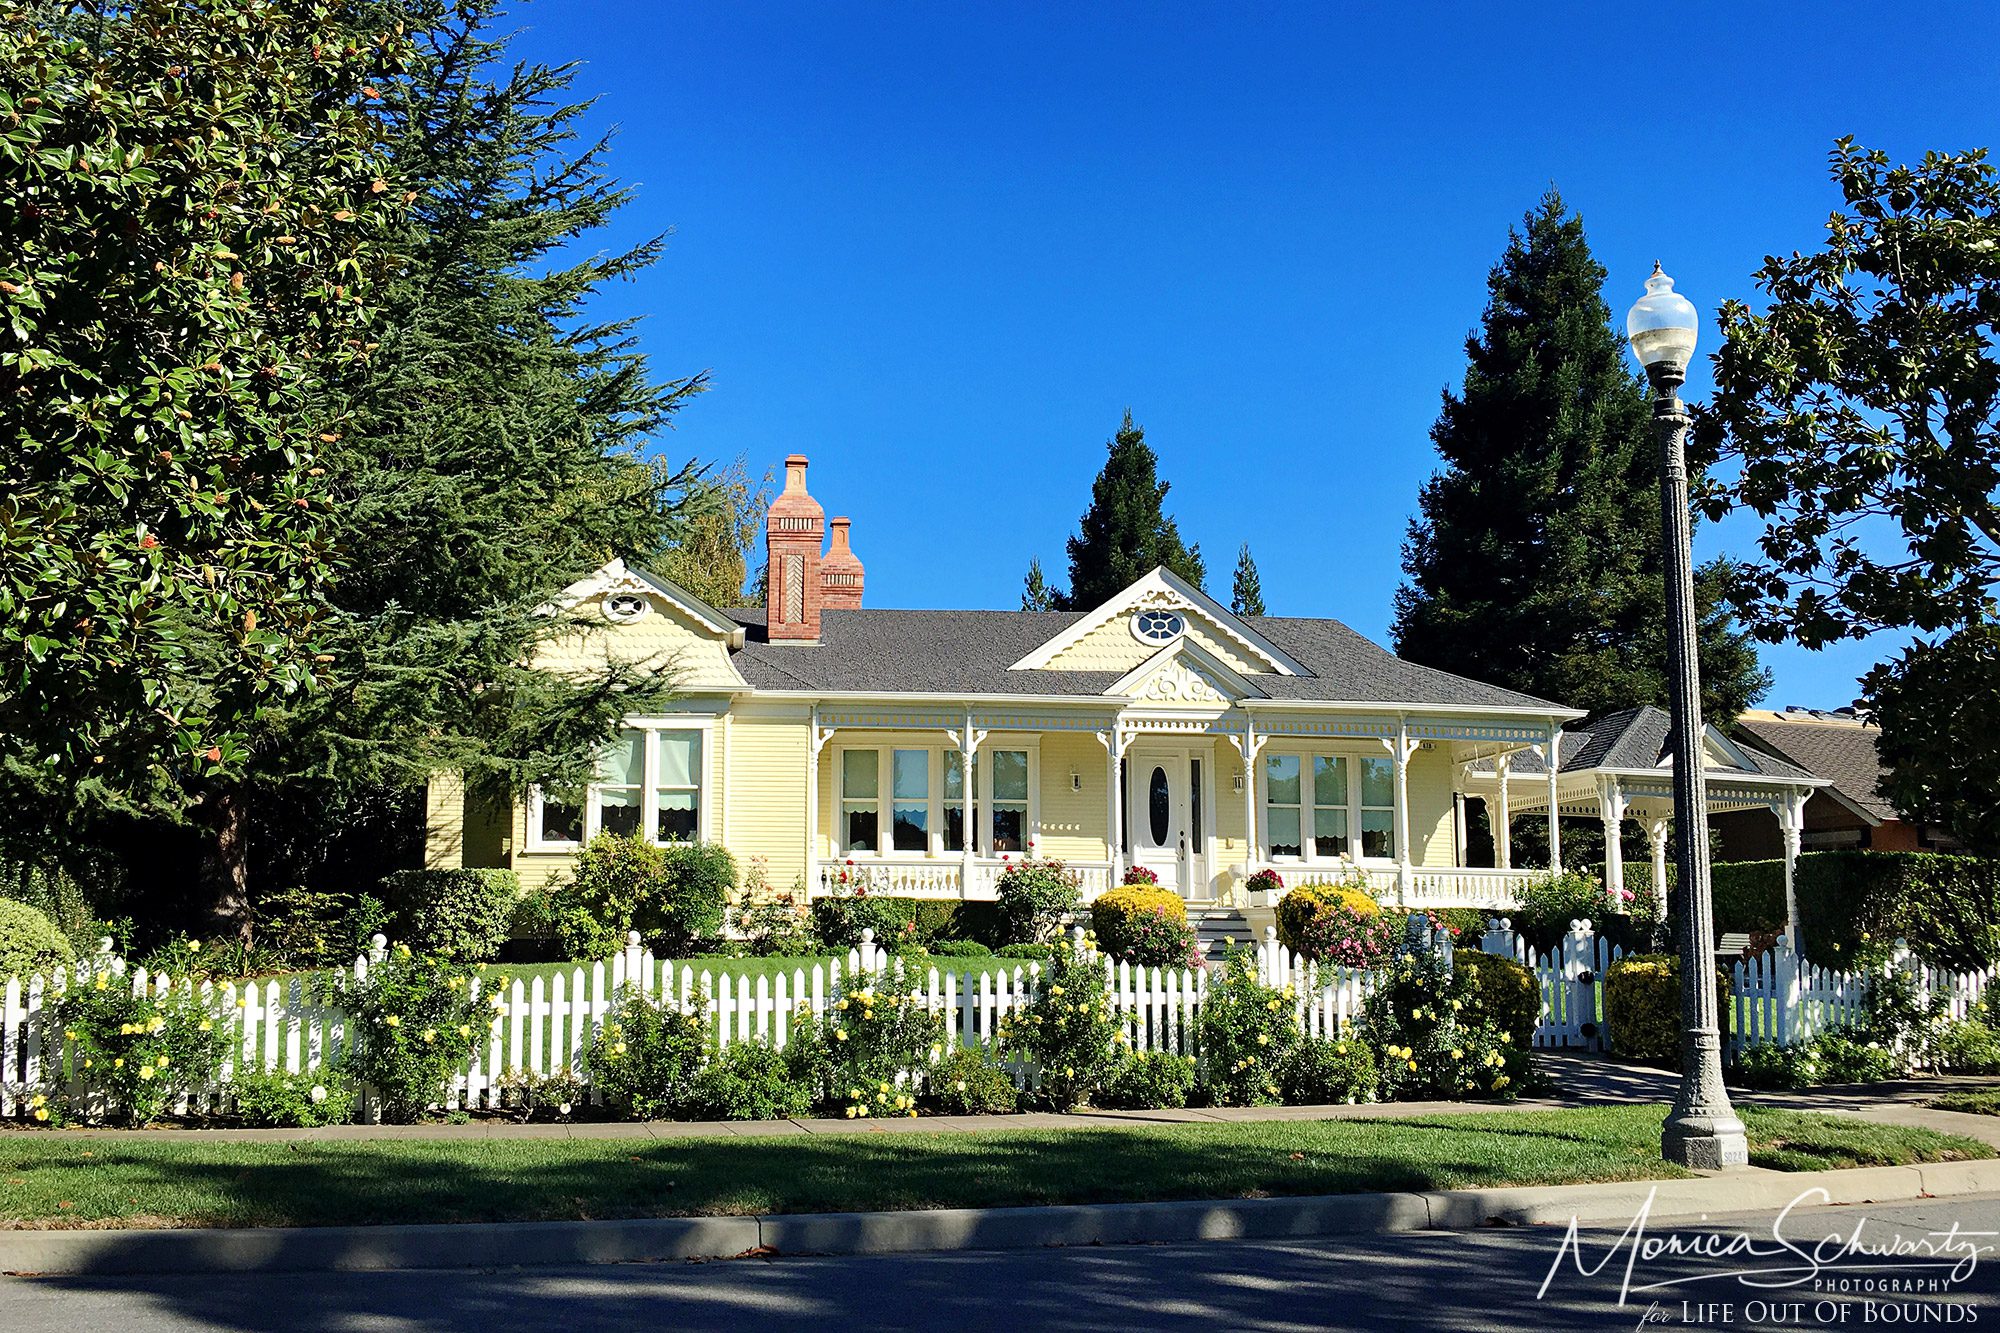 Beautiful-Victorian-Homes-and-Cottages-in-Sonoma-California